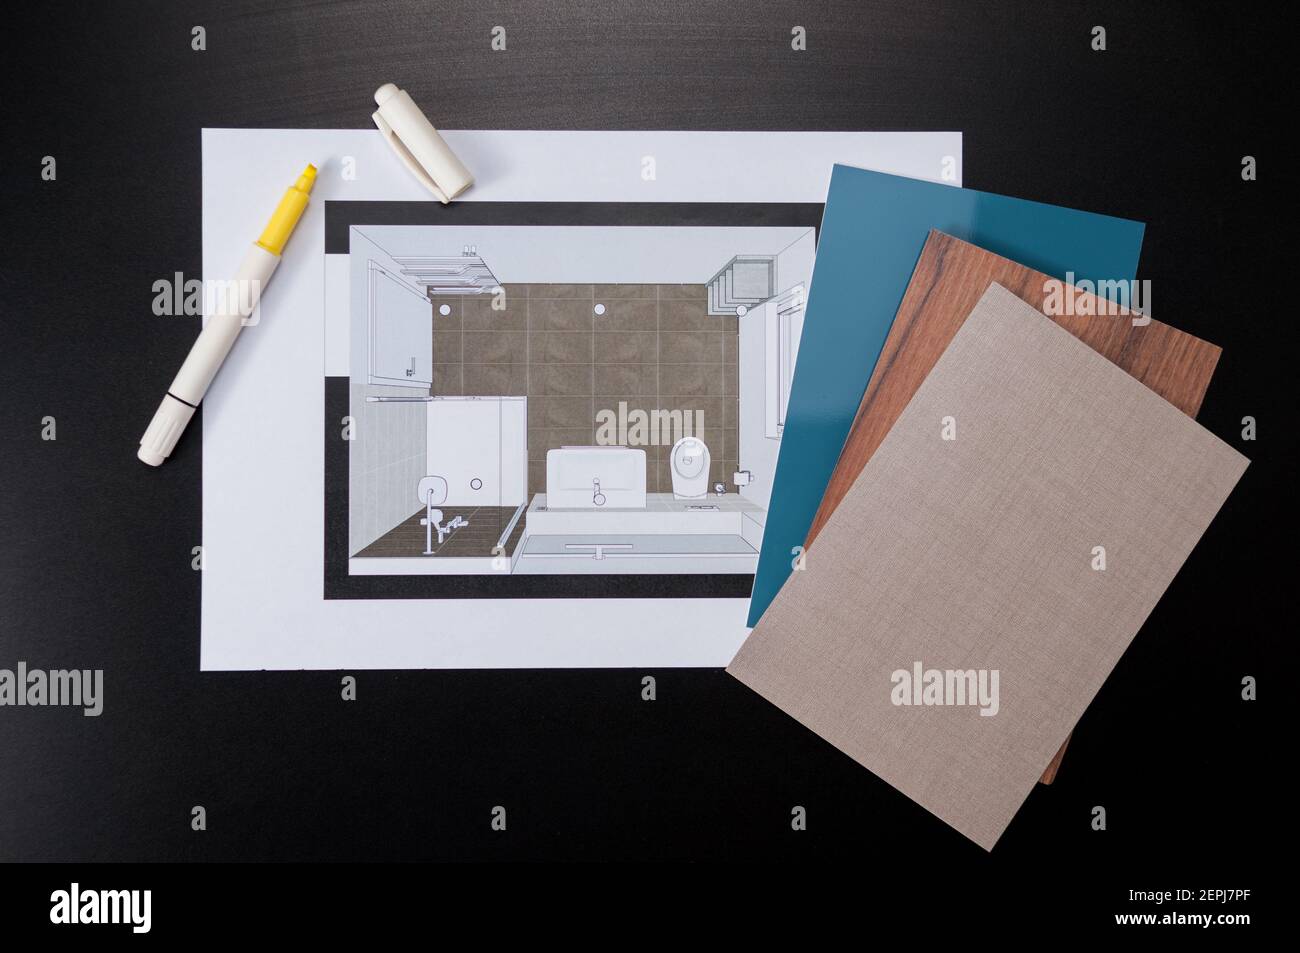 Look at a floor plan. Design of a bath. Next to it a pen and color samples for furniture Stock Photo